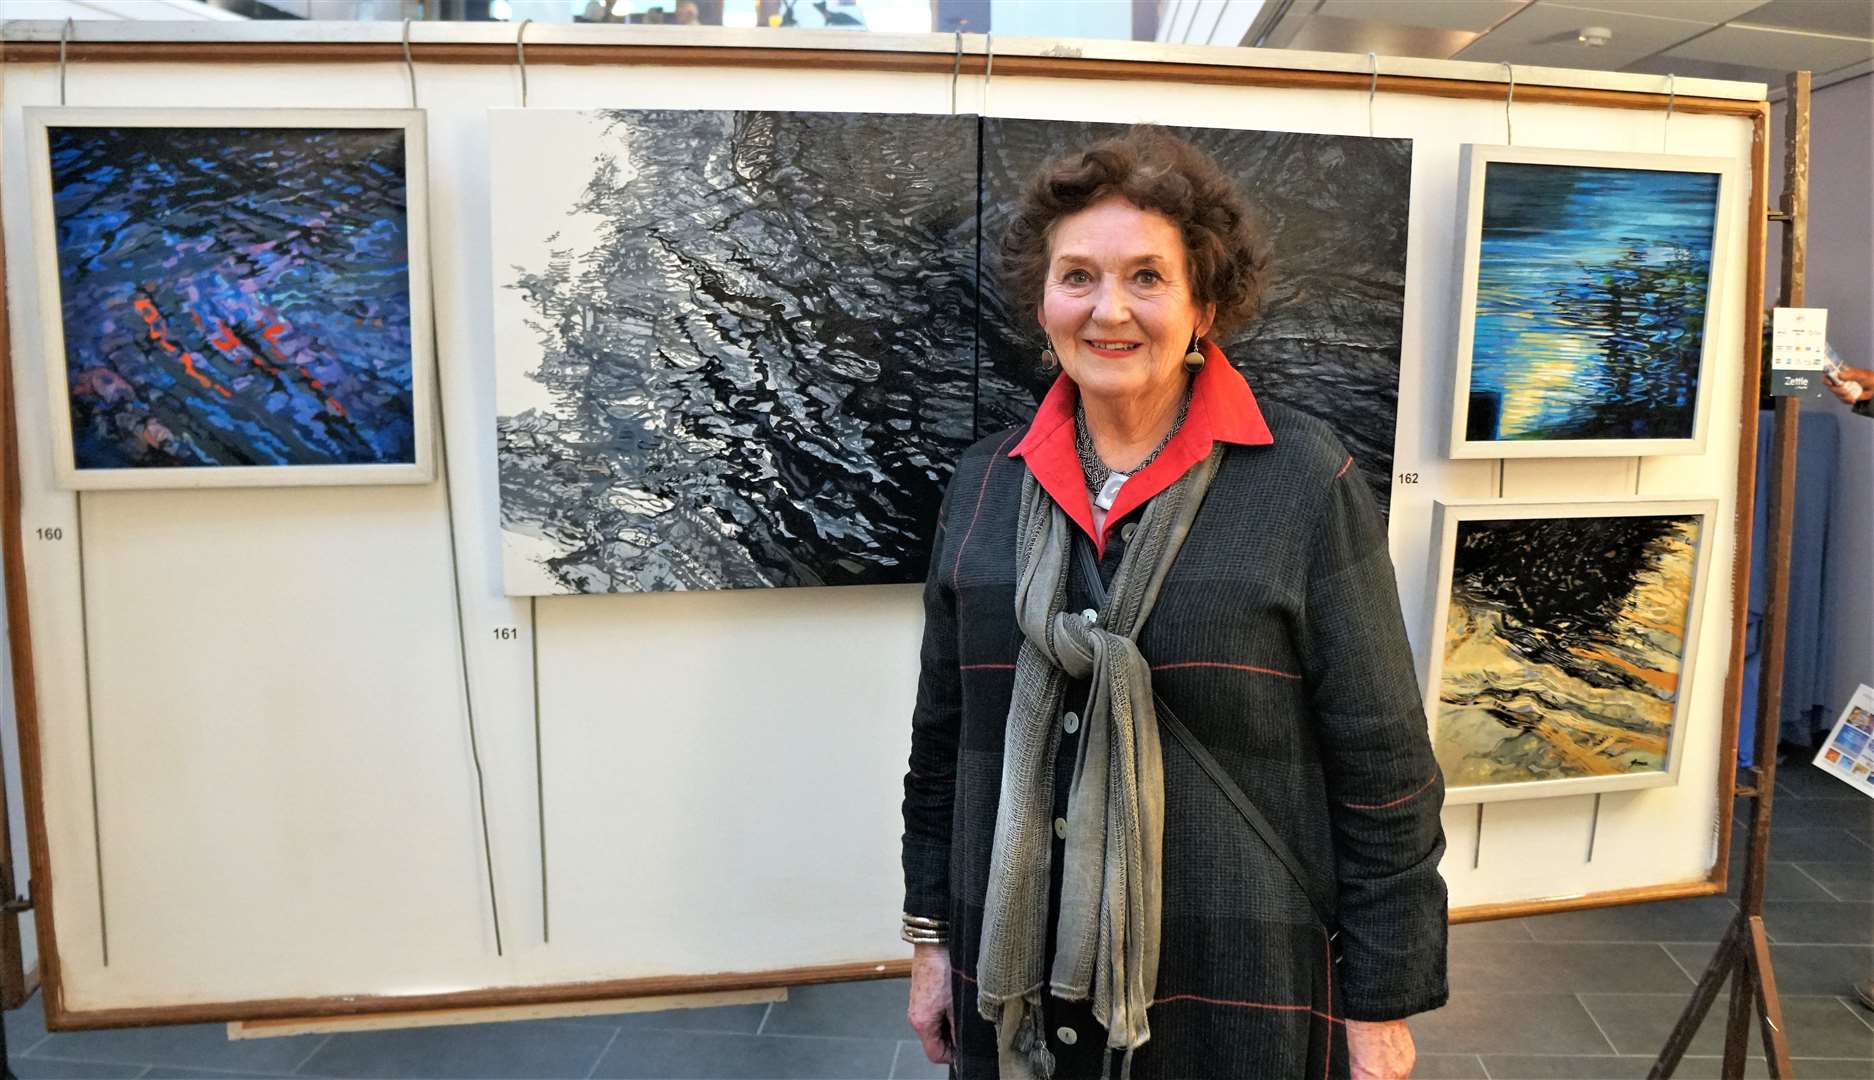 The Thurso show provided a chance for trained artist Jenny Bruce to show off some of her latest works inspired by light and shade across water surfaces in Edinburgh canals. Picture: DGS